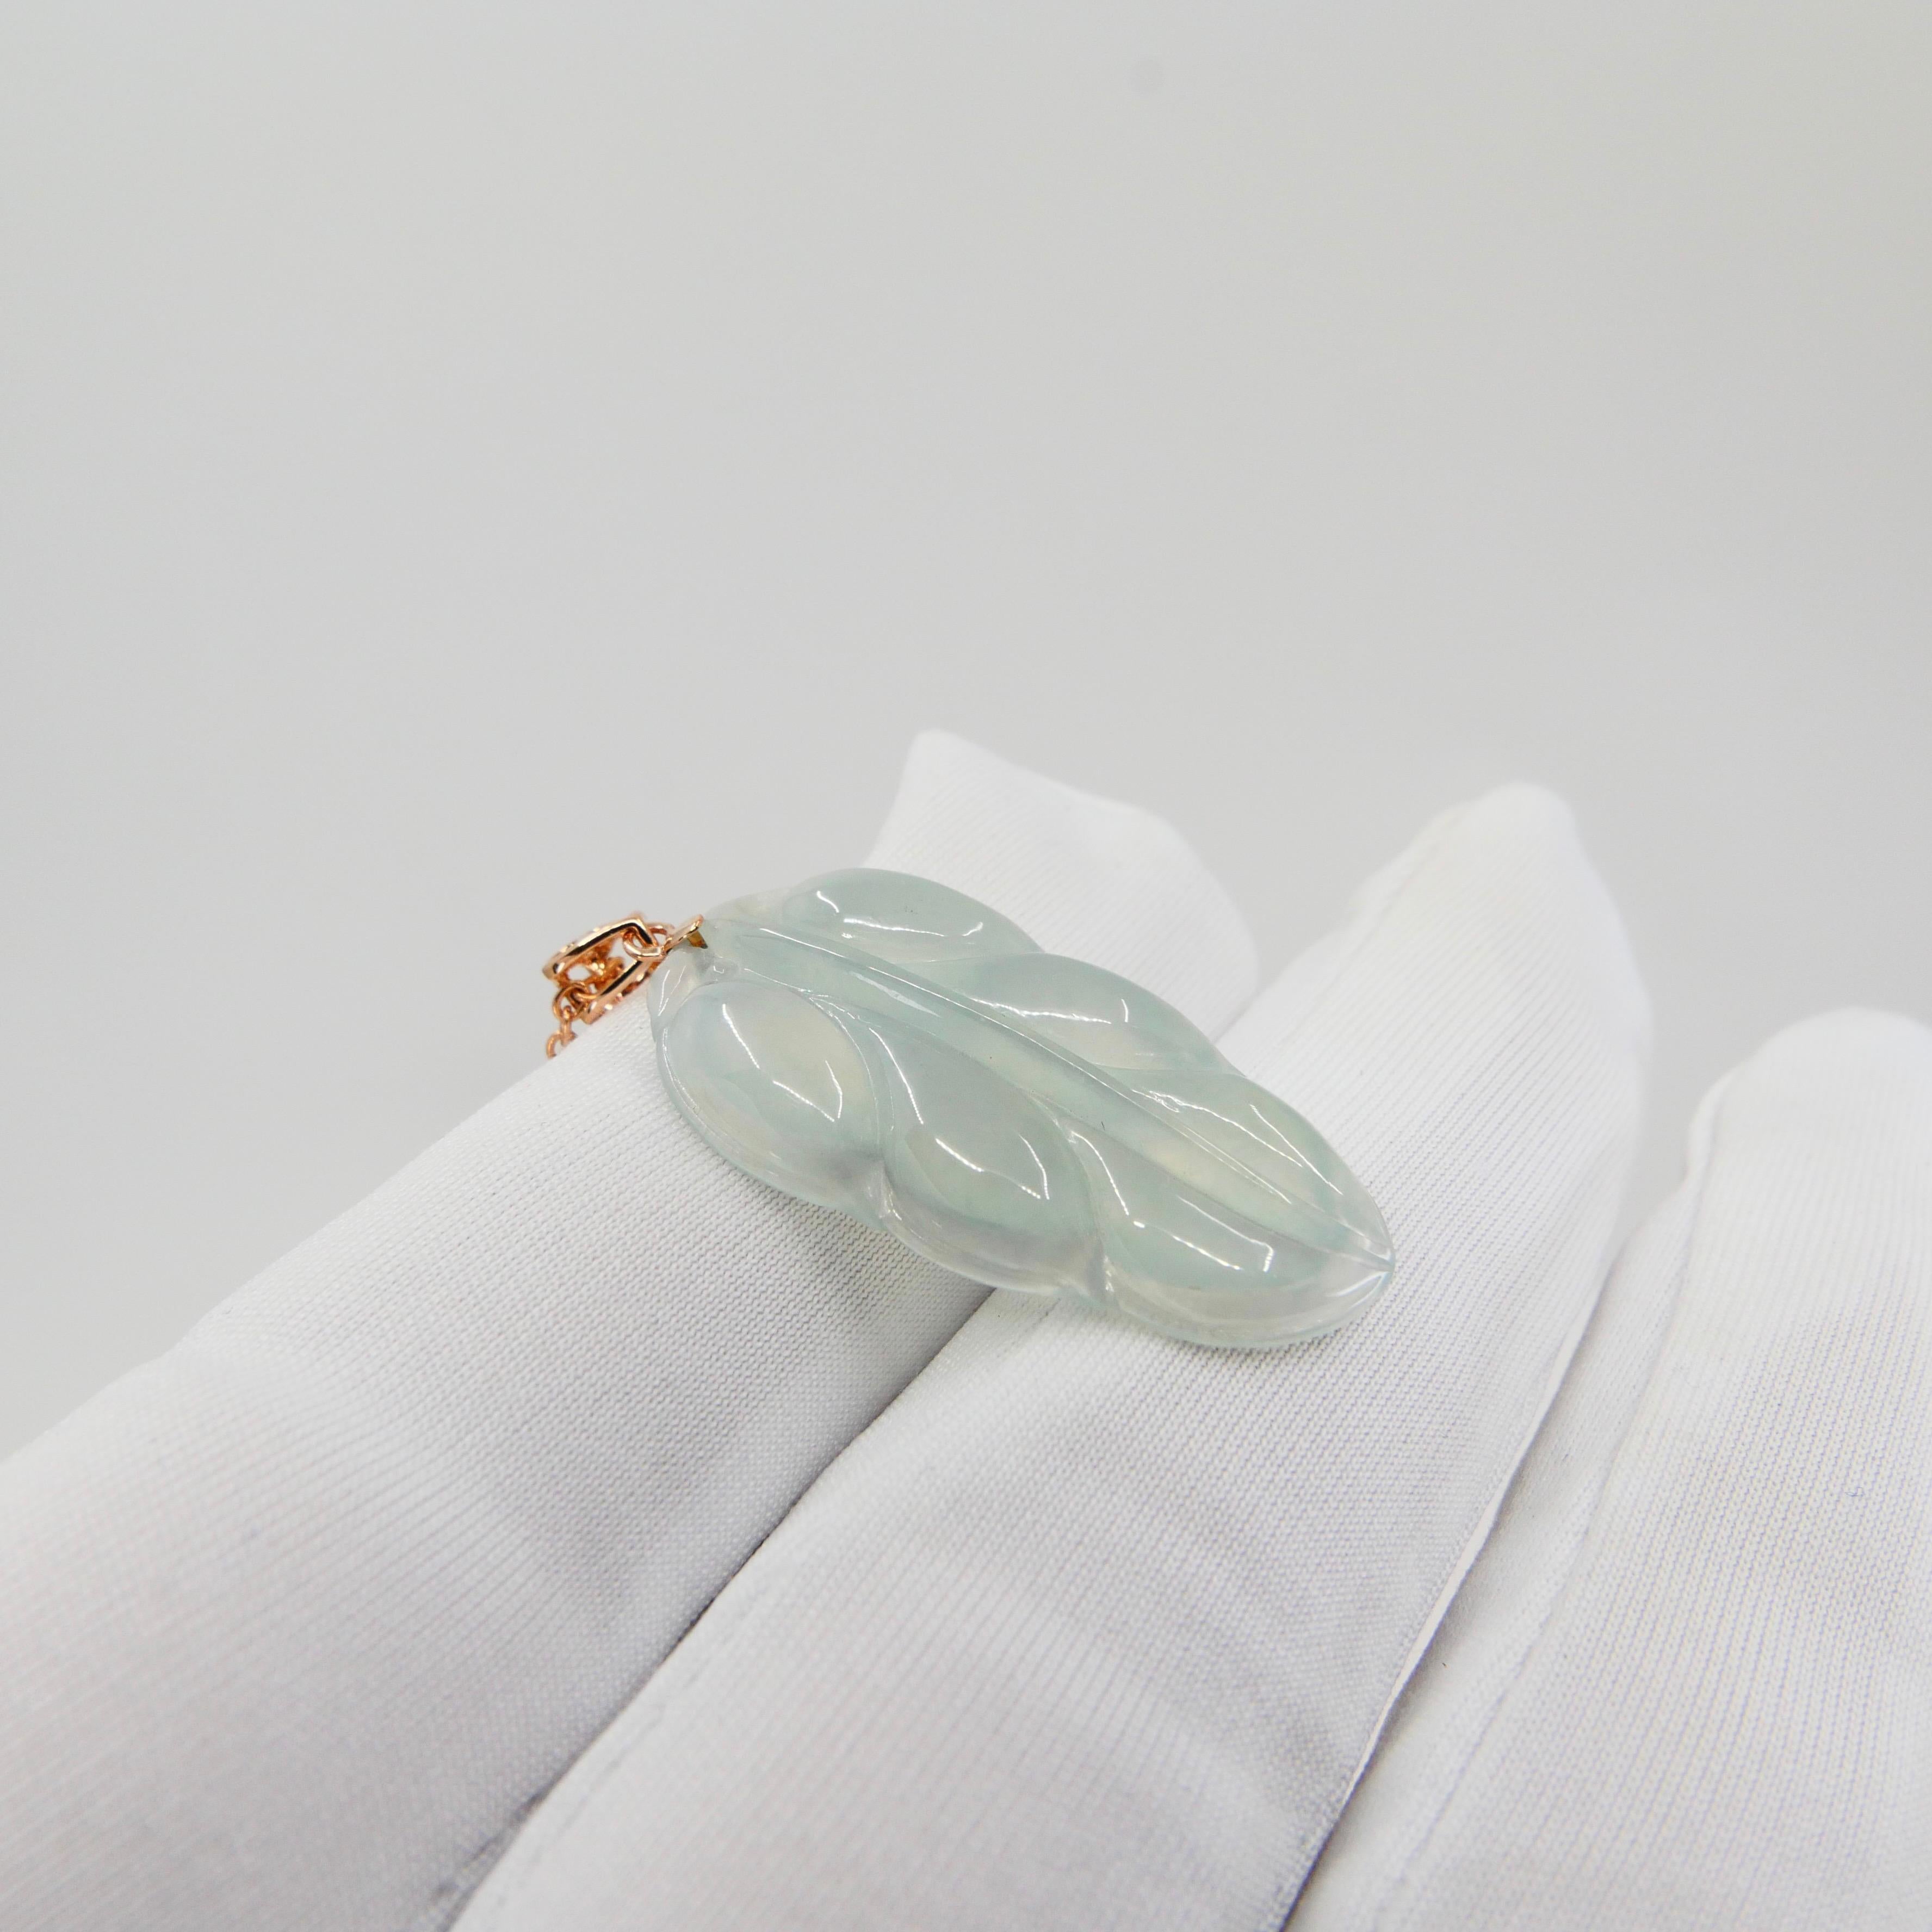 Certified 18.32 Carat Icy Jadeite Jade Leaf Pendant Necklace, Good Fortune In New Condition For Sale In Hong Kong, HK